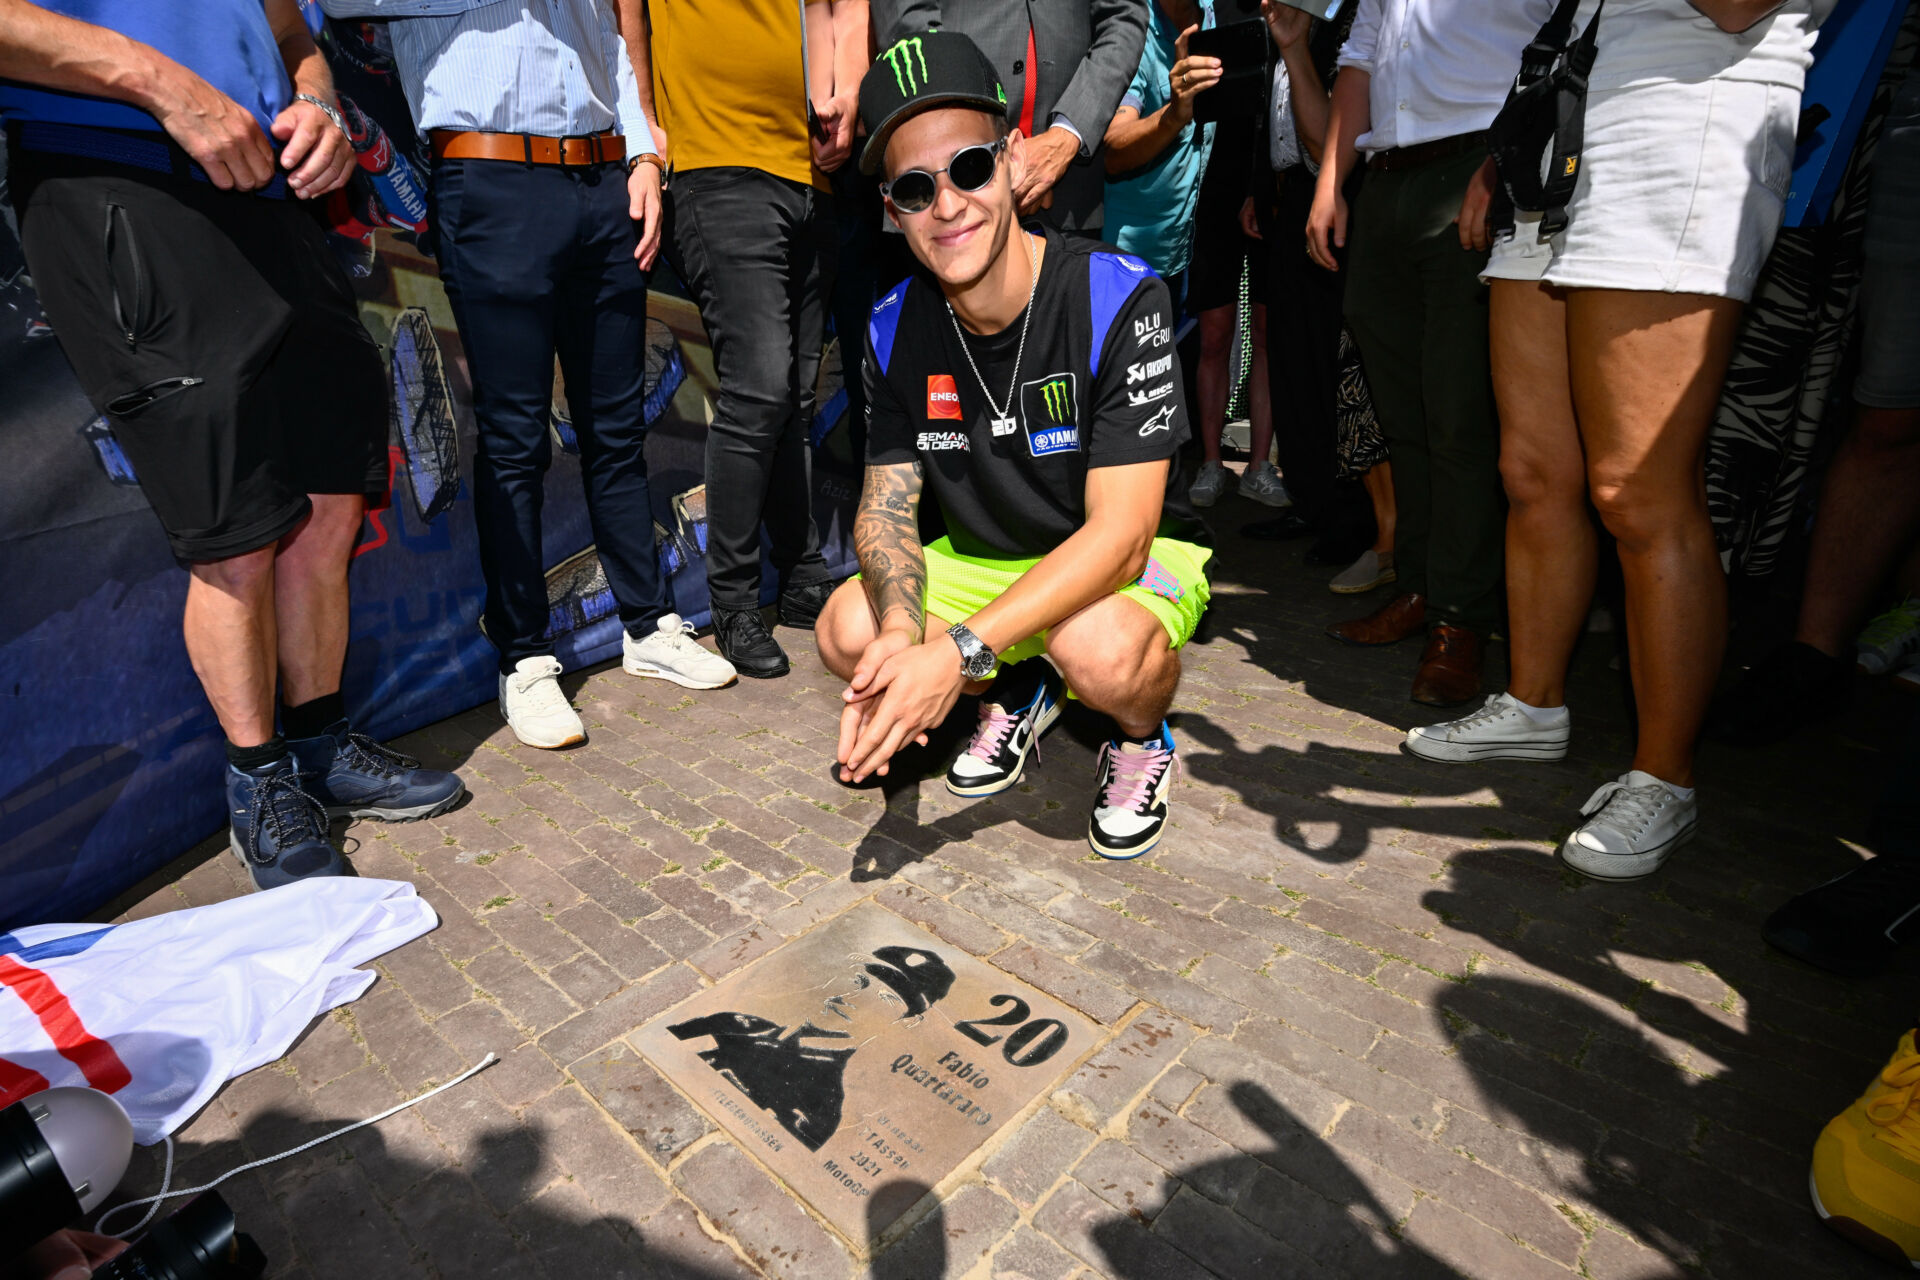 The city of Assen honored Fabio Quartararo with one of the first plaques on its new Walk of Fame. Photo courtesy Dorna.